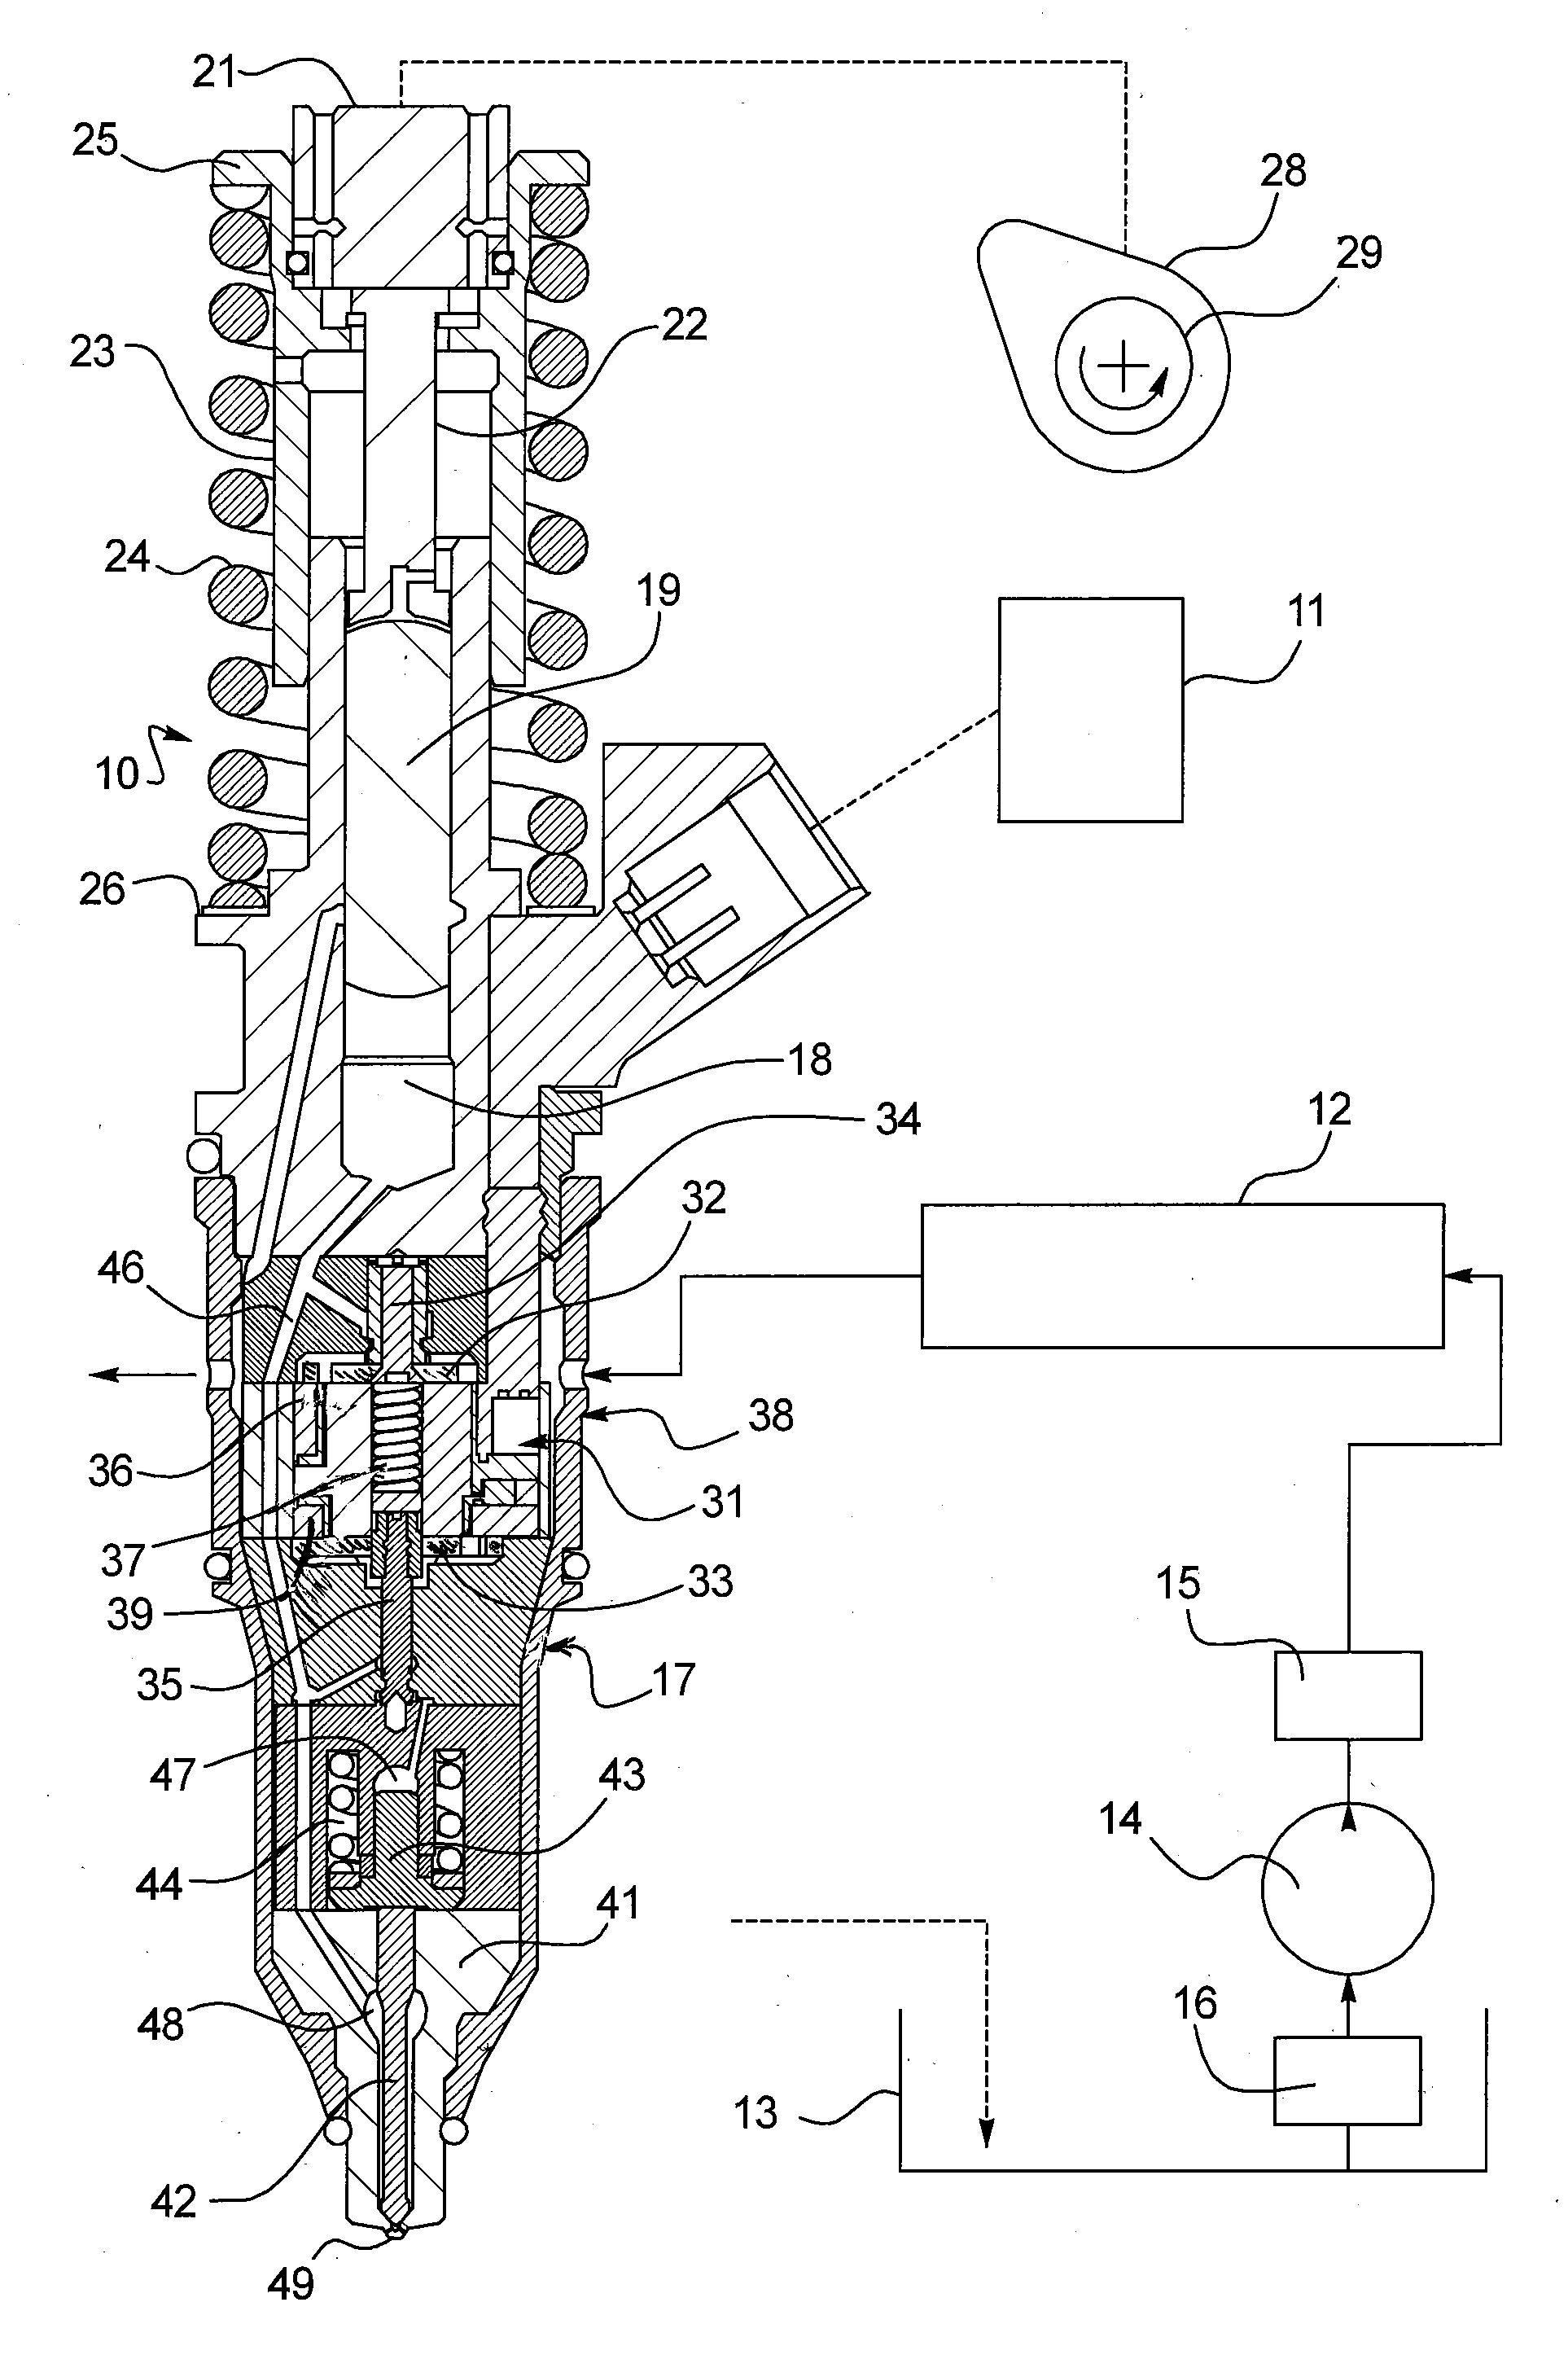 System and Method for Cooling Fuel Injectors